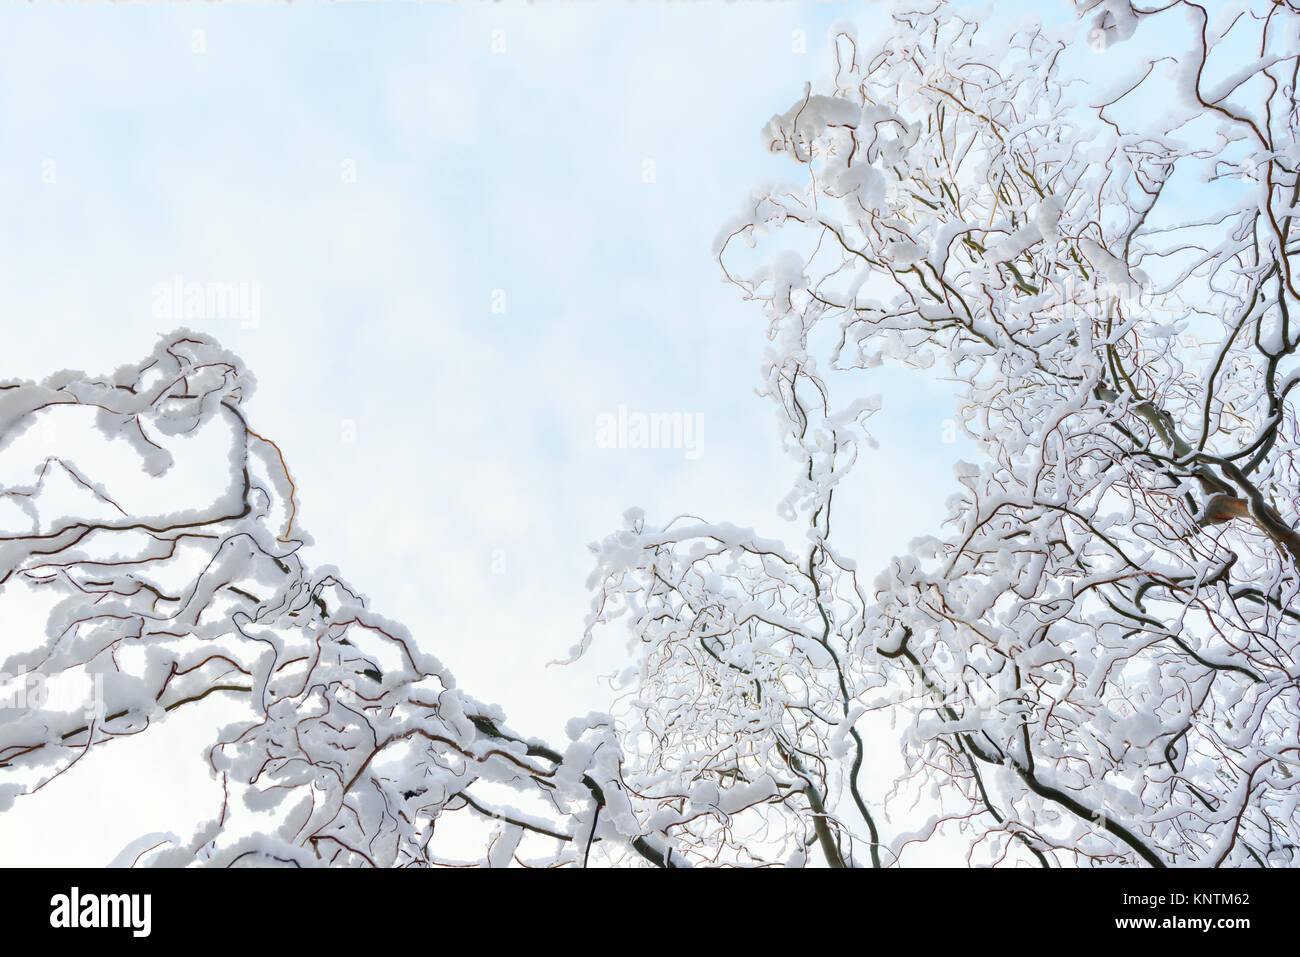 Beautyful winter background with snowy branches Stock Photo